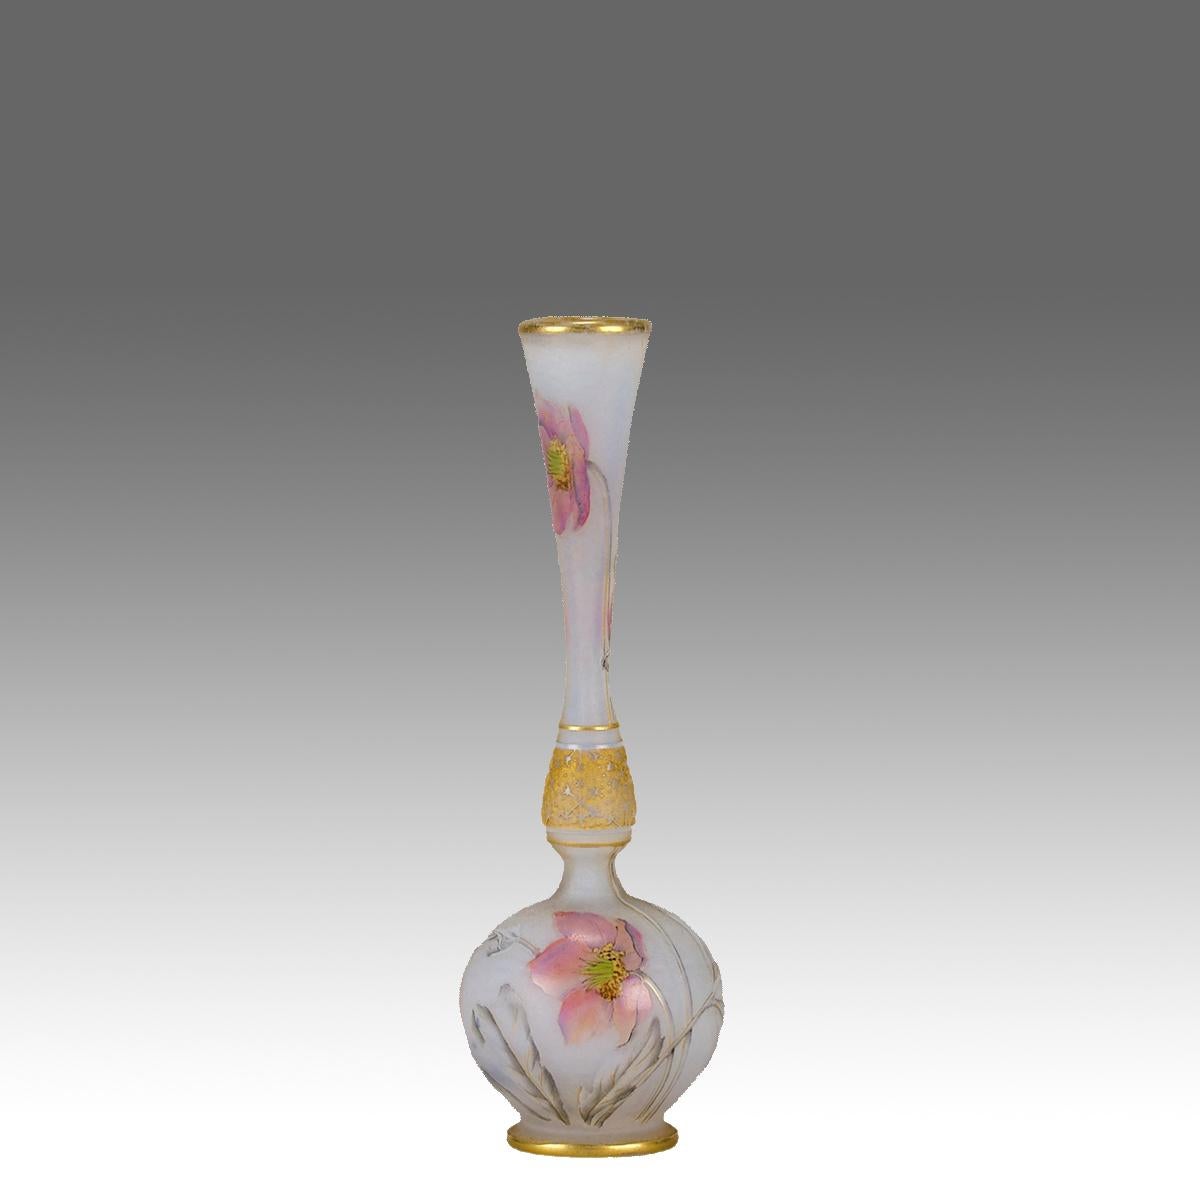 An intricate cameo glass vase etched and enamelled with pink hellebore floral decoration against a white field highlighted with gilding. The vase exhibiting very fine colour and detail, signed Daum Nancy with the Cross of Lorraine.

ADDITIONAL